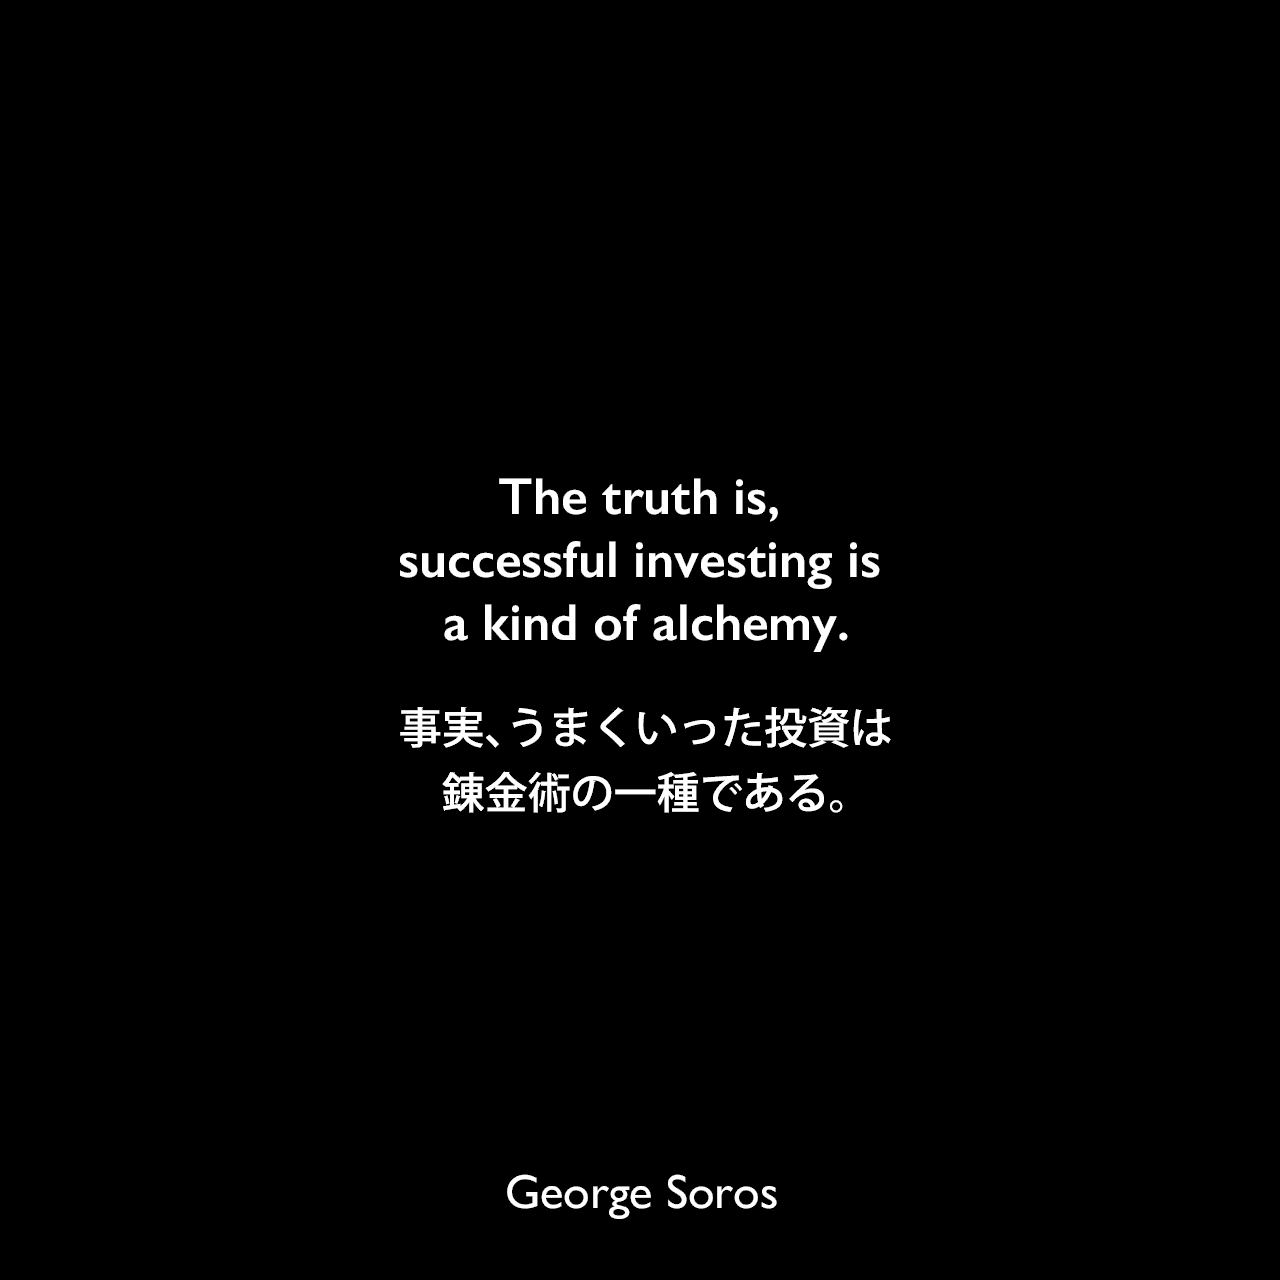 The truth is, successful investing is a kind of alchemy.事実、うまくいった投資は錬金術の一種である。George Soros